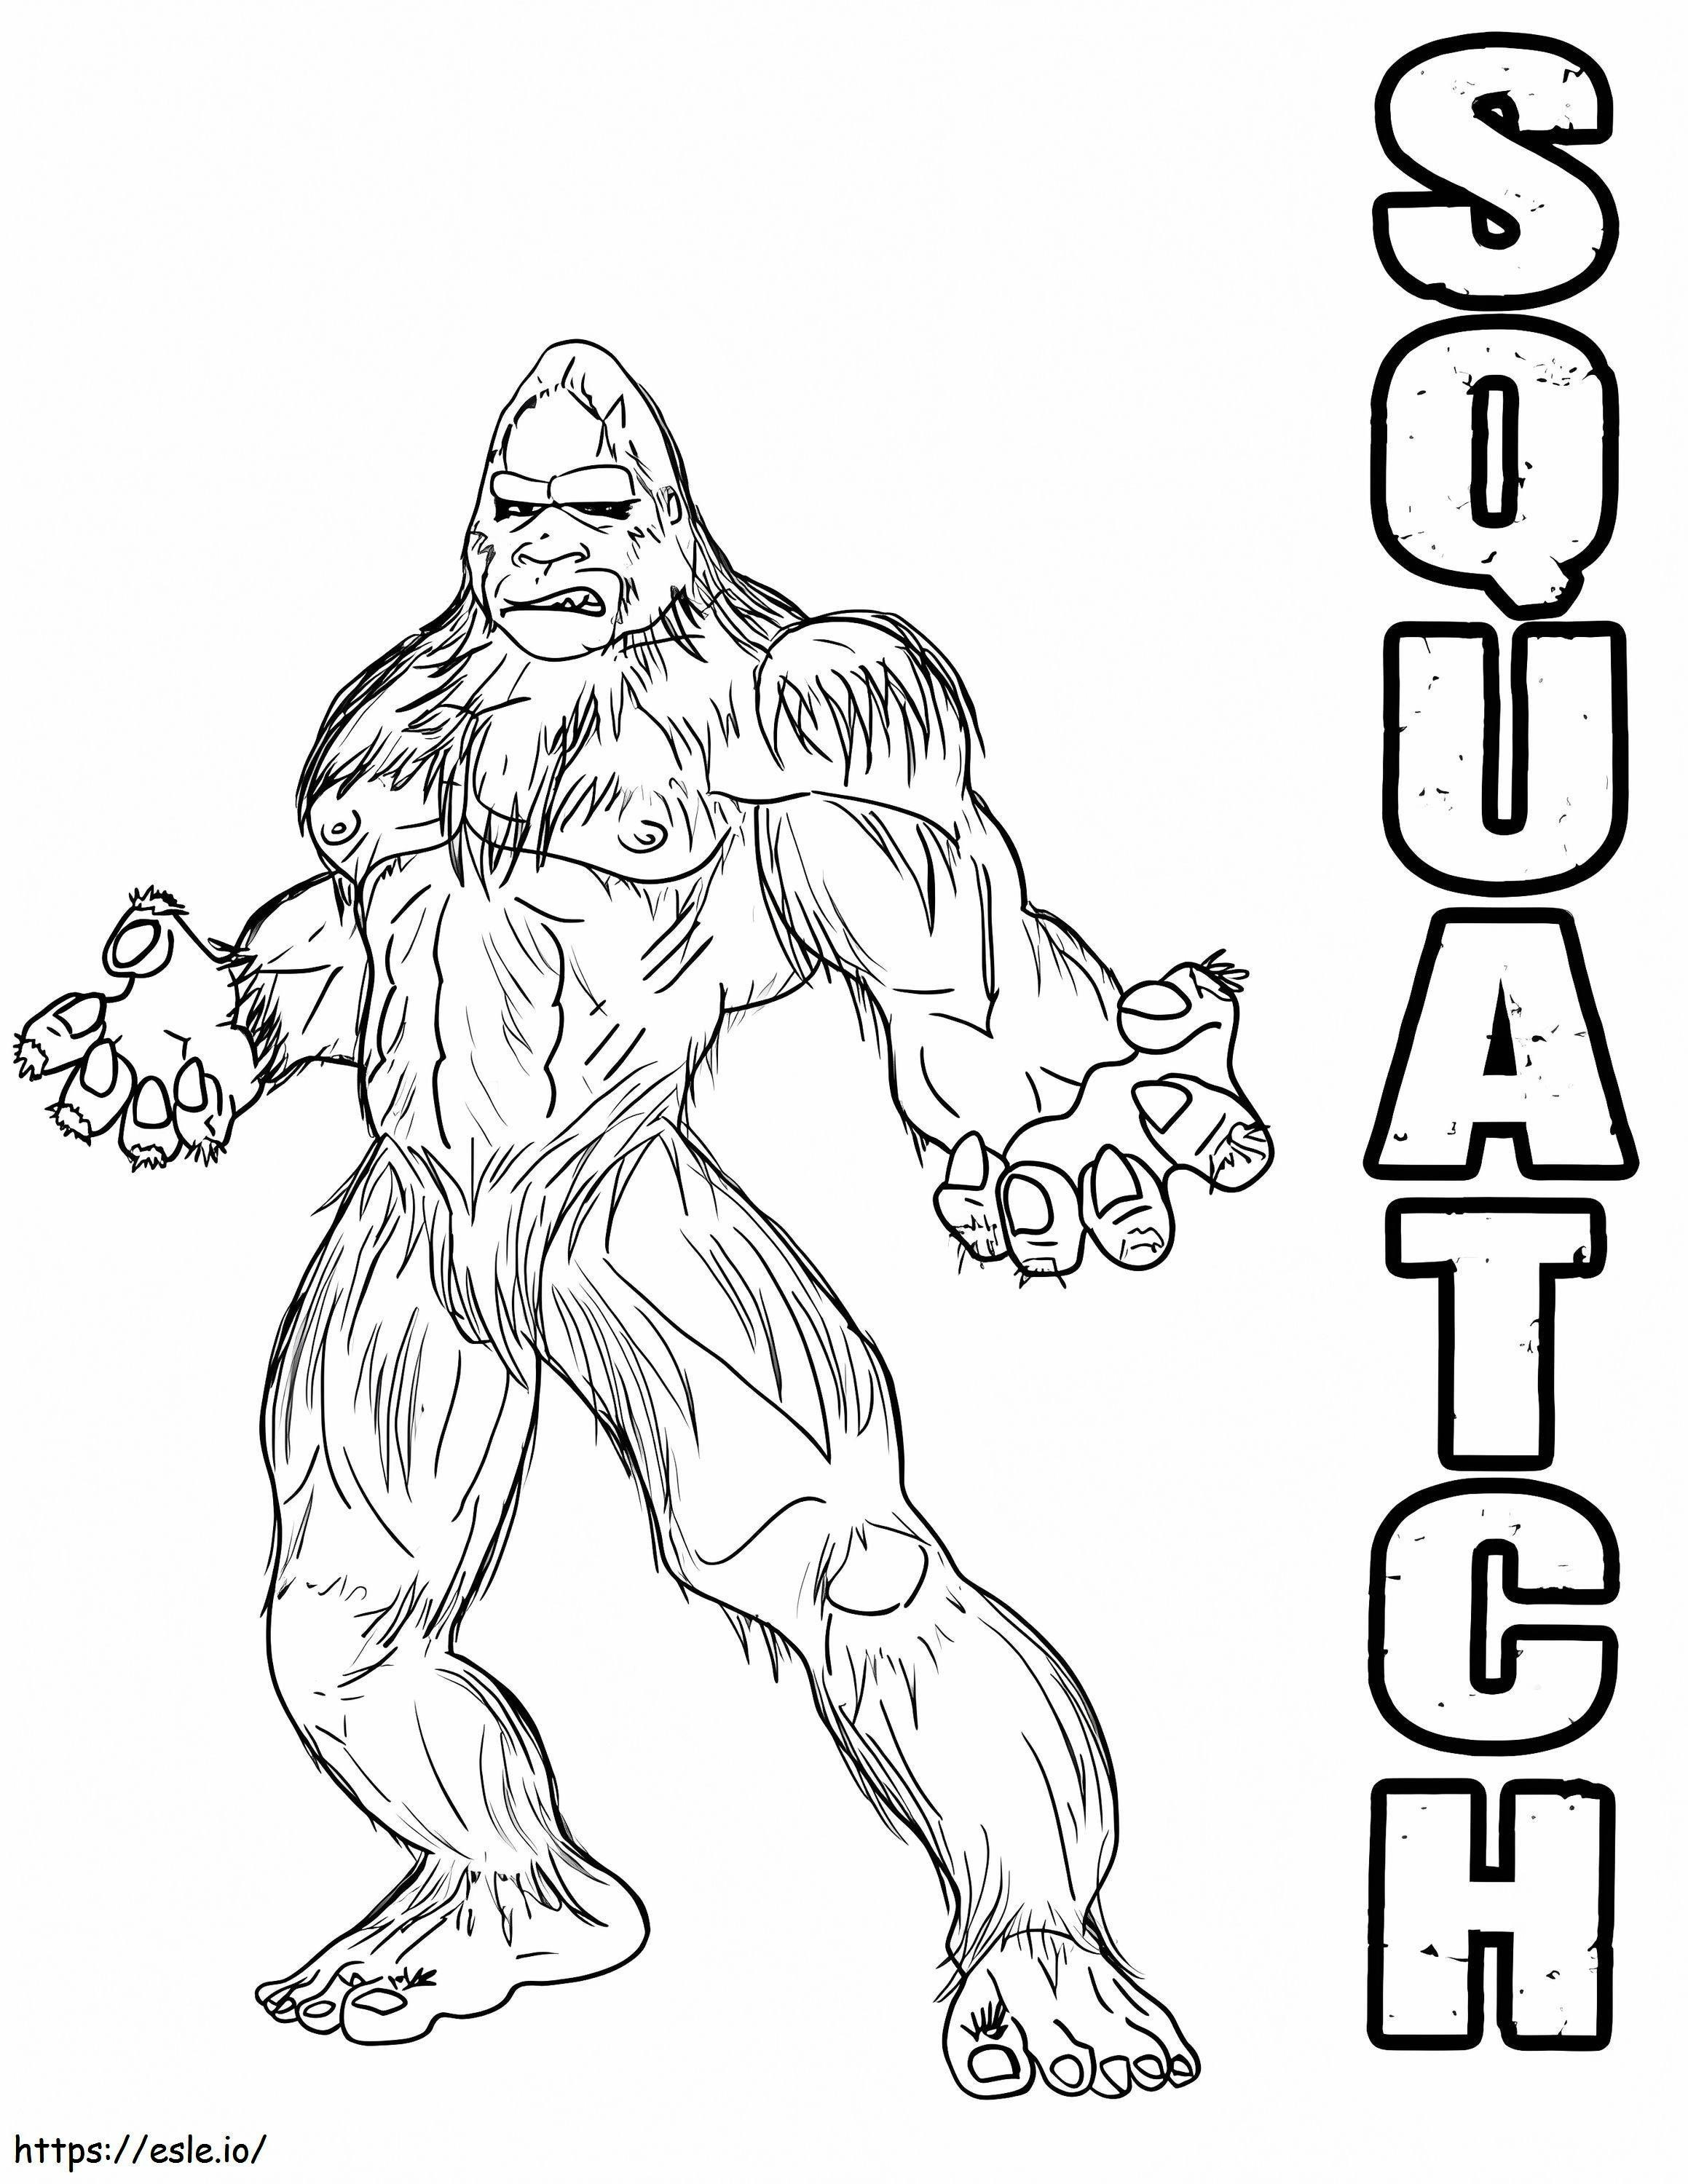 Mysterious Bigfoot 2 coloring page